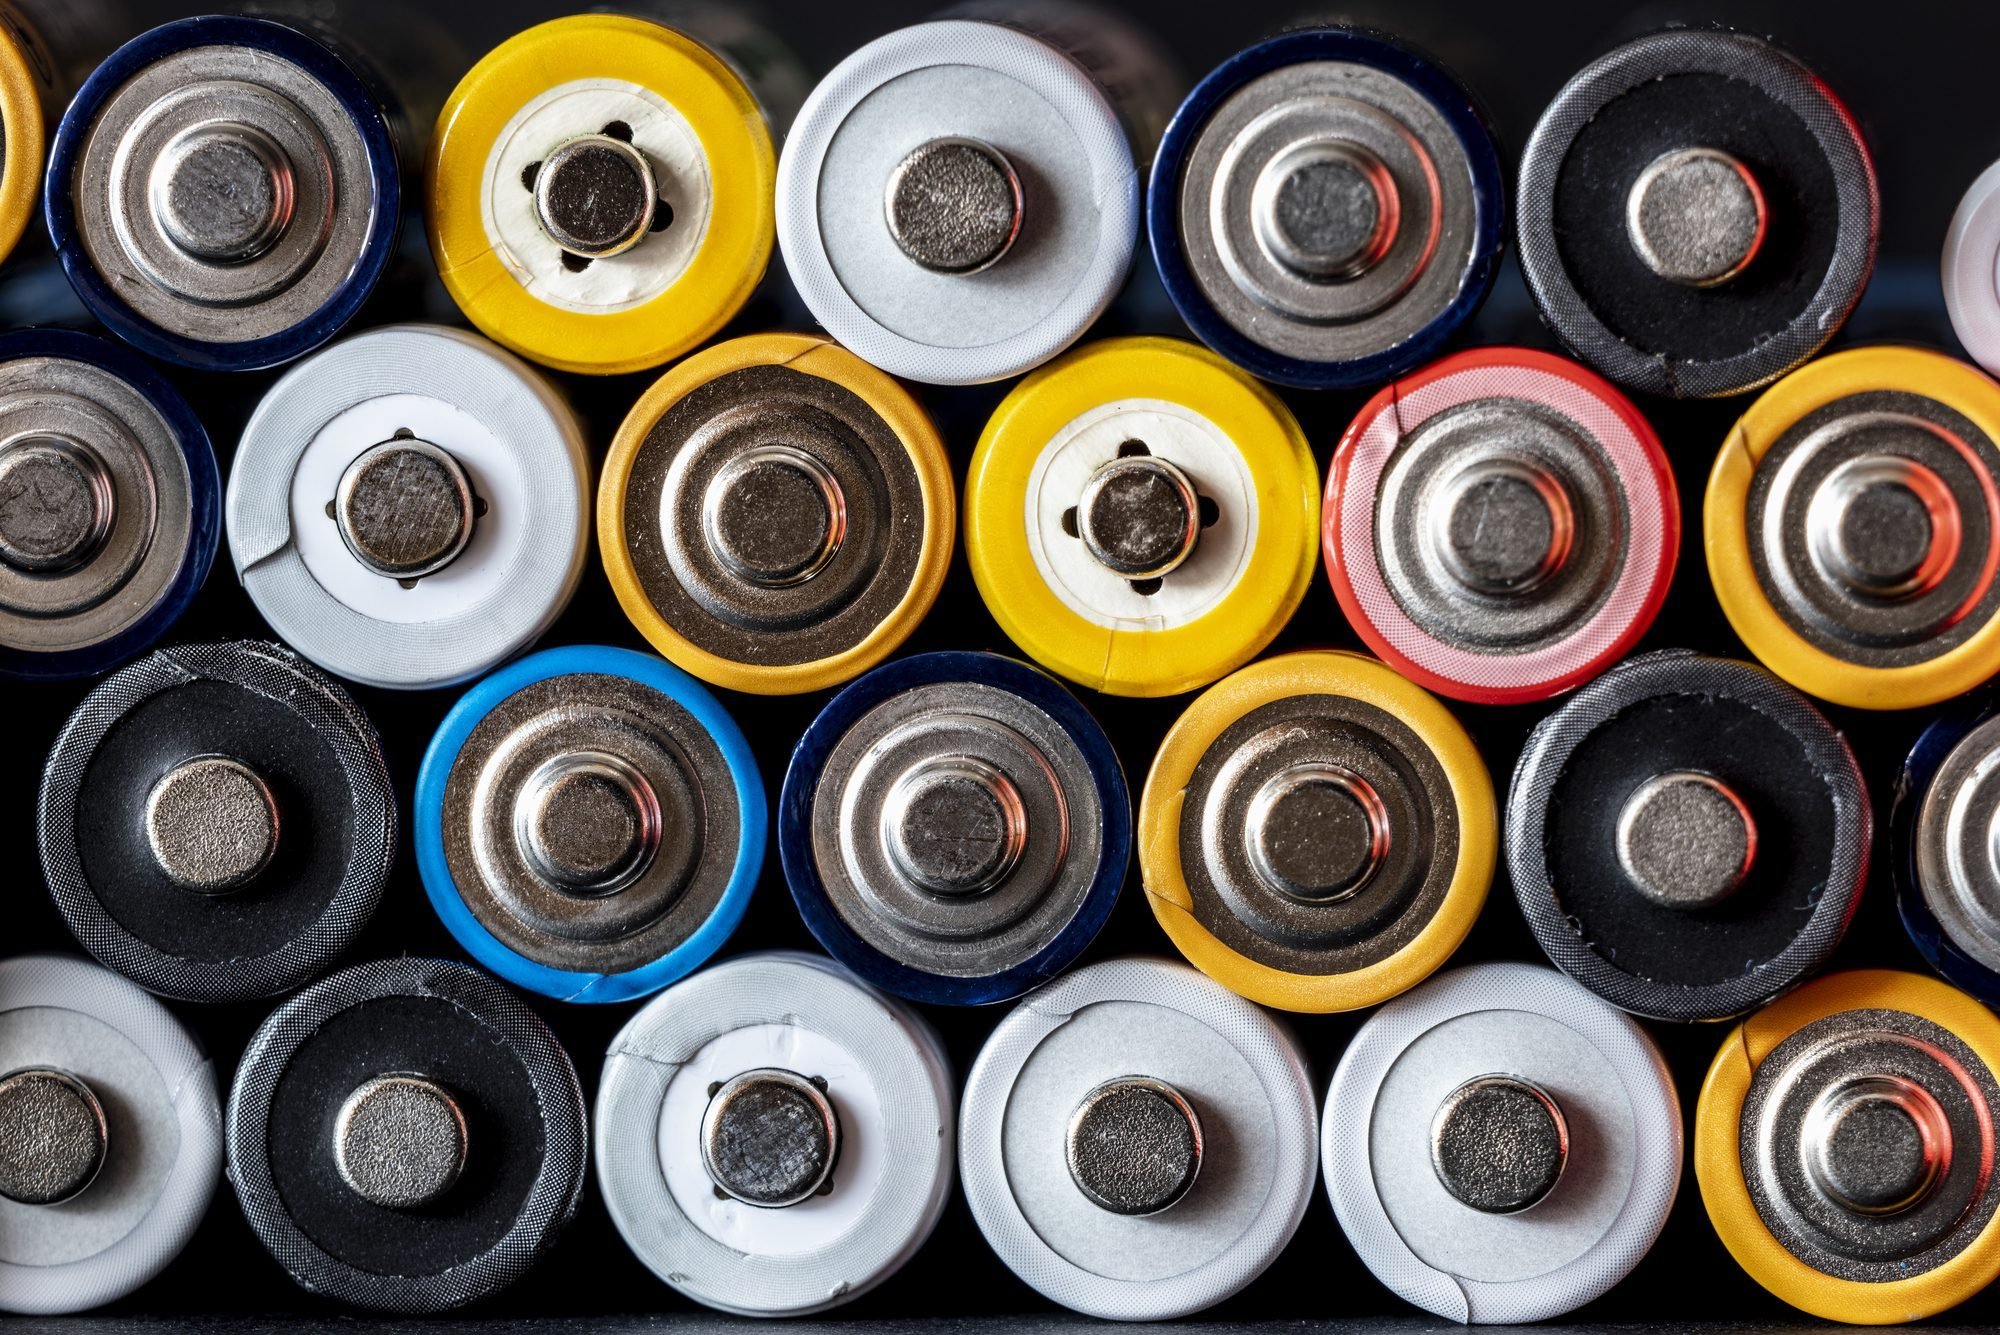 Can You Recycle Batteries?